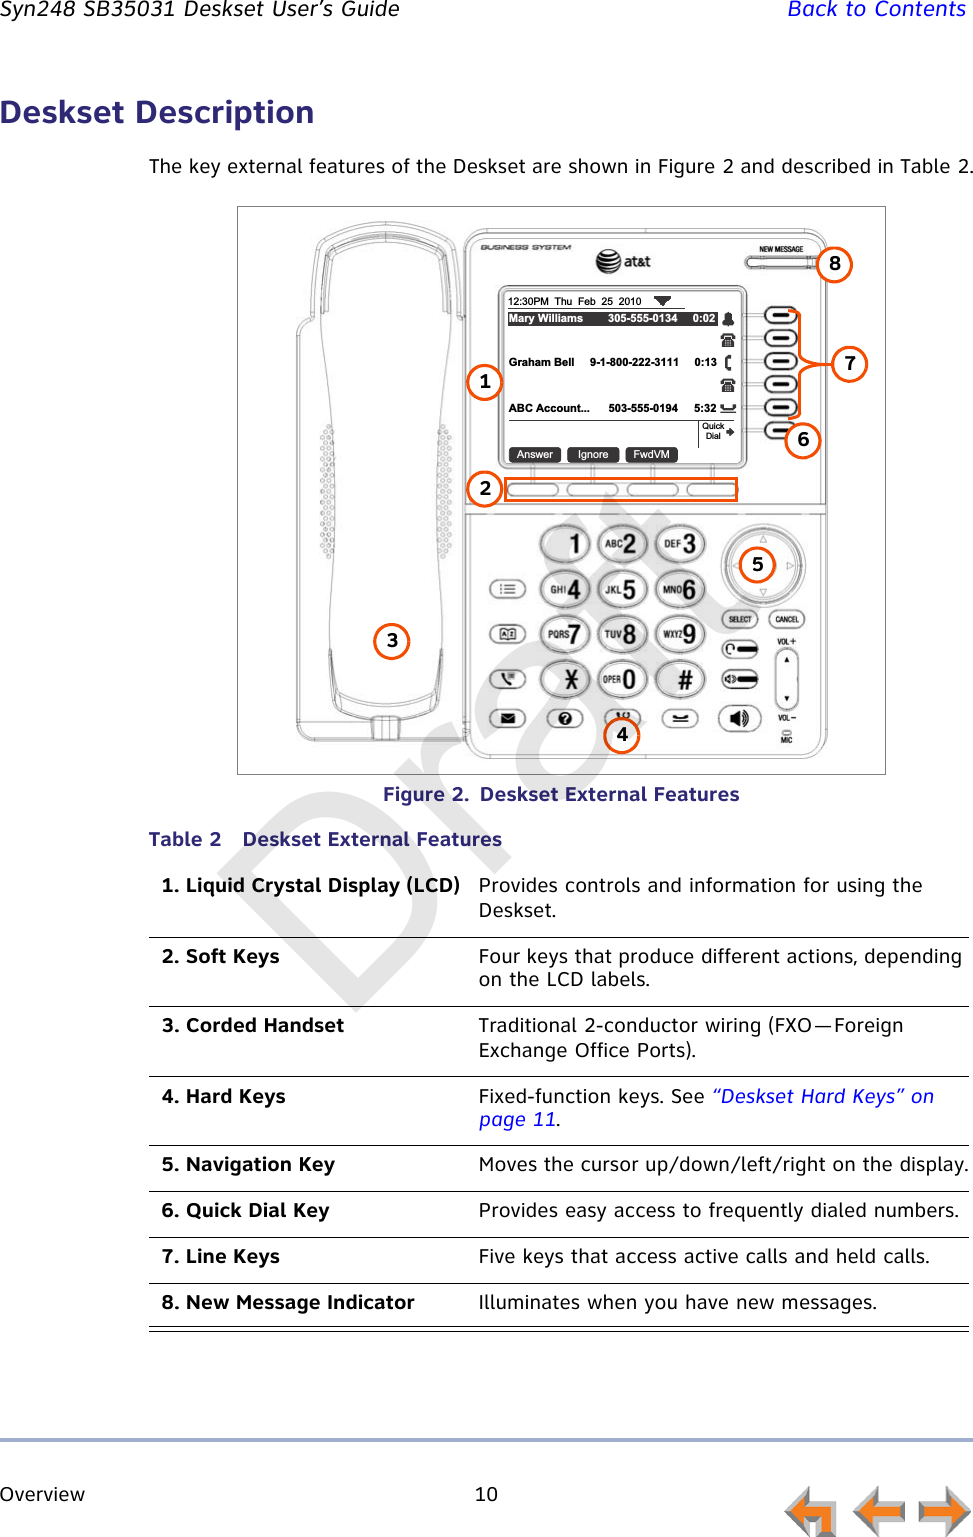 Overview 10         Syn248 SB35031 Deskset User’s Guide Back to ContentsDeskset DescriptionThe key external features of the Deskset are shown in Figure 2 and described in Table 2.Figure 2.  Deskset External FeaturesTable 2  Deskset External Features1. Liquid Crystal Display (LCD) Provides controls and information for using the Deskset.2. Soft Keys Four keys that produce different actions, depending on the LCD labels. 3. Corded Handset Traditional 2-conductor wiring (FXO — Foreign Exchange Office Ports).4. Hard Keys Fixed-function keys. See “Deskset Hard Keys” on page 11.5. Navigation Key Moves the cursor up/down/left/right on the display.6. Quick Dial Key Provides easy access to frequently dialed numbers.7. Line Keys Five keys that access active calls and held calls.8. New Message Indicator Illuminates when you have new messages.QuickDialFwdVMAnswer Ignore12:30PM  Thu  Feb  25  2010Mary Williams        305-555-0134     0:02Graham Bell     9-1-800-222-3111     0:13ABC Account...      503-555-0194     5:3212345678Draft